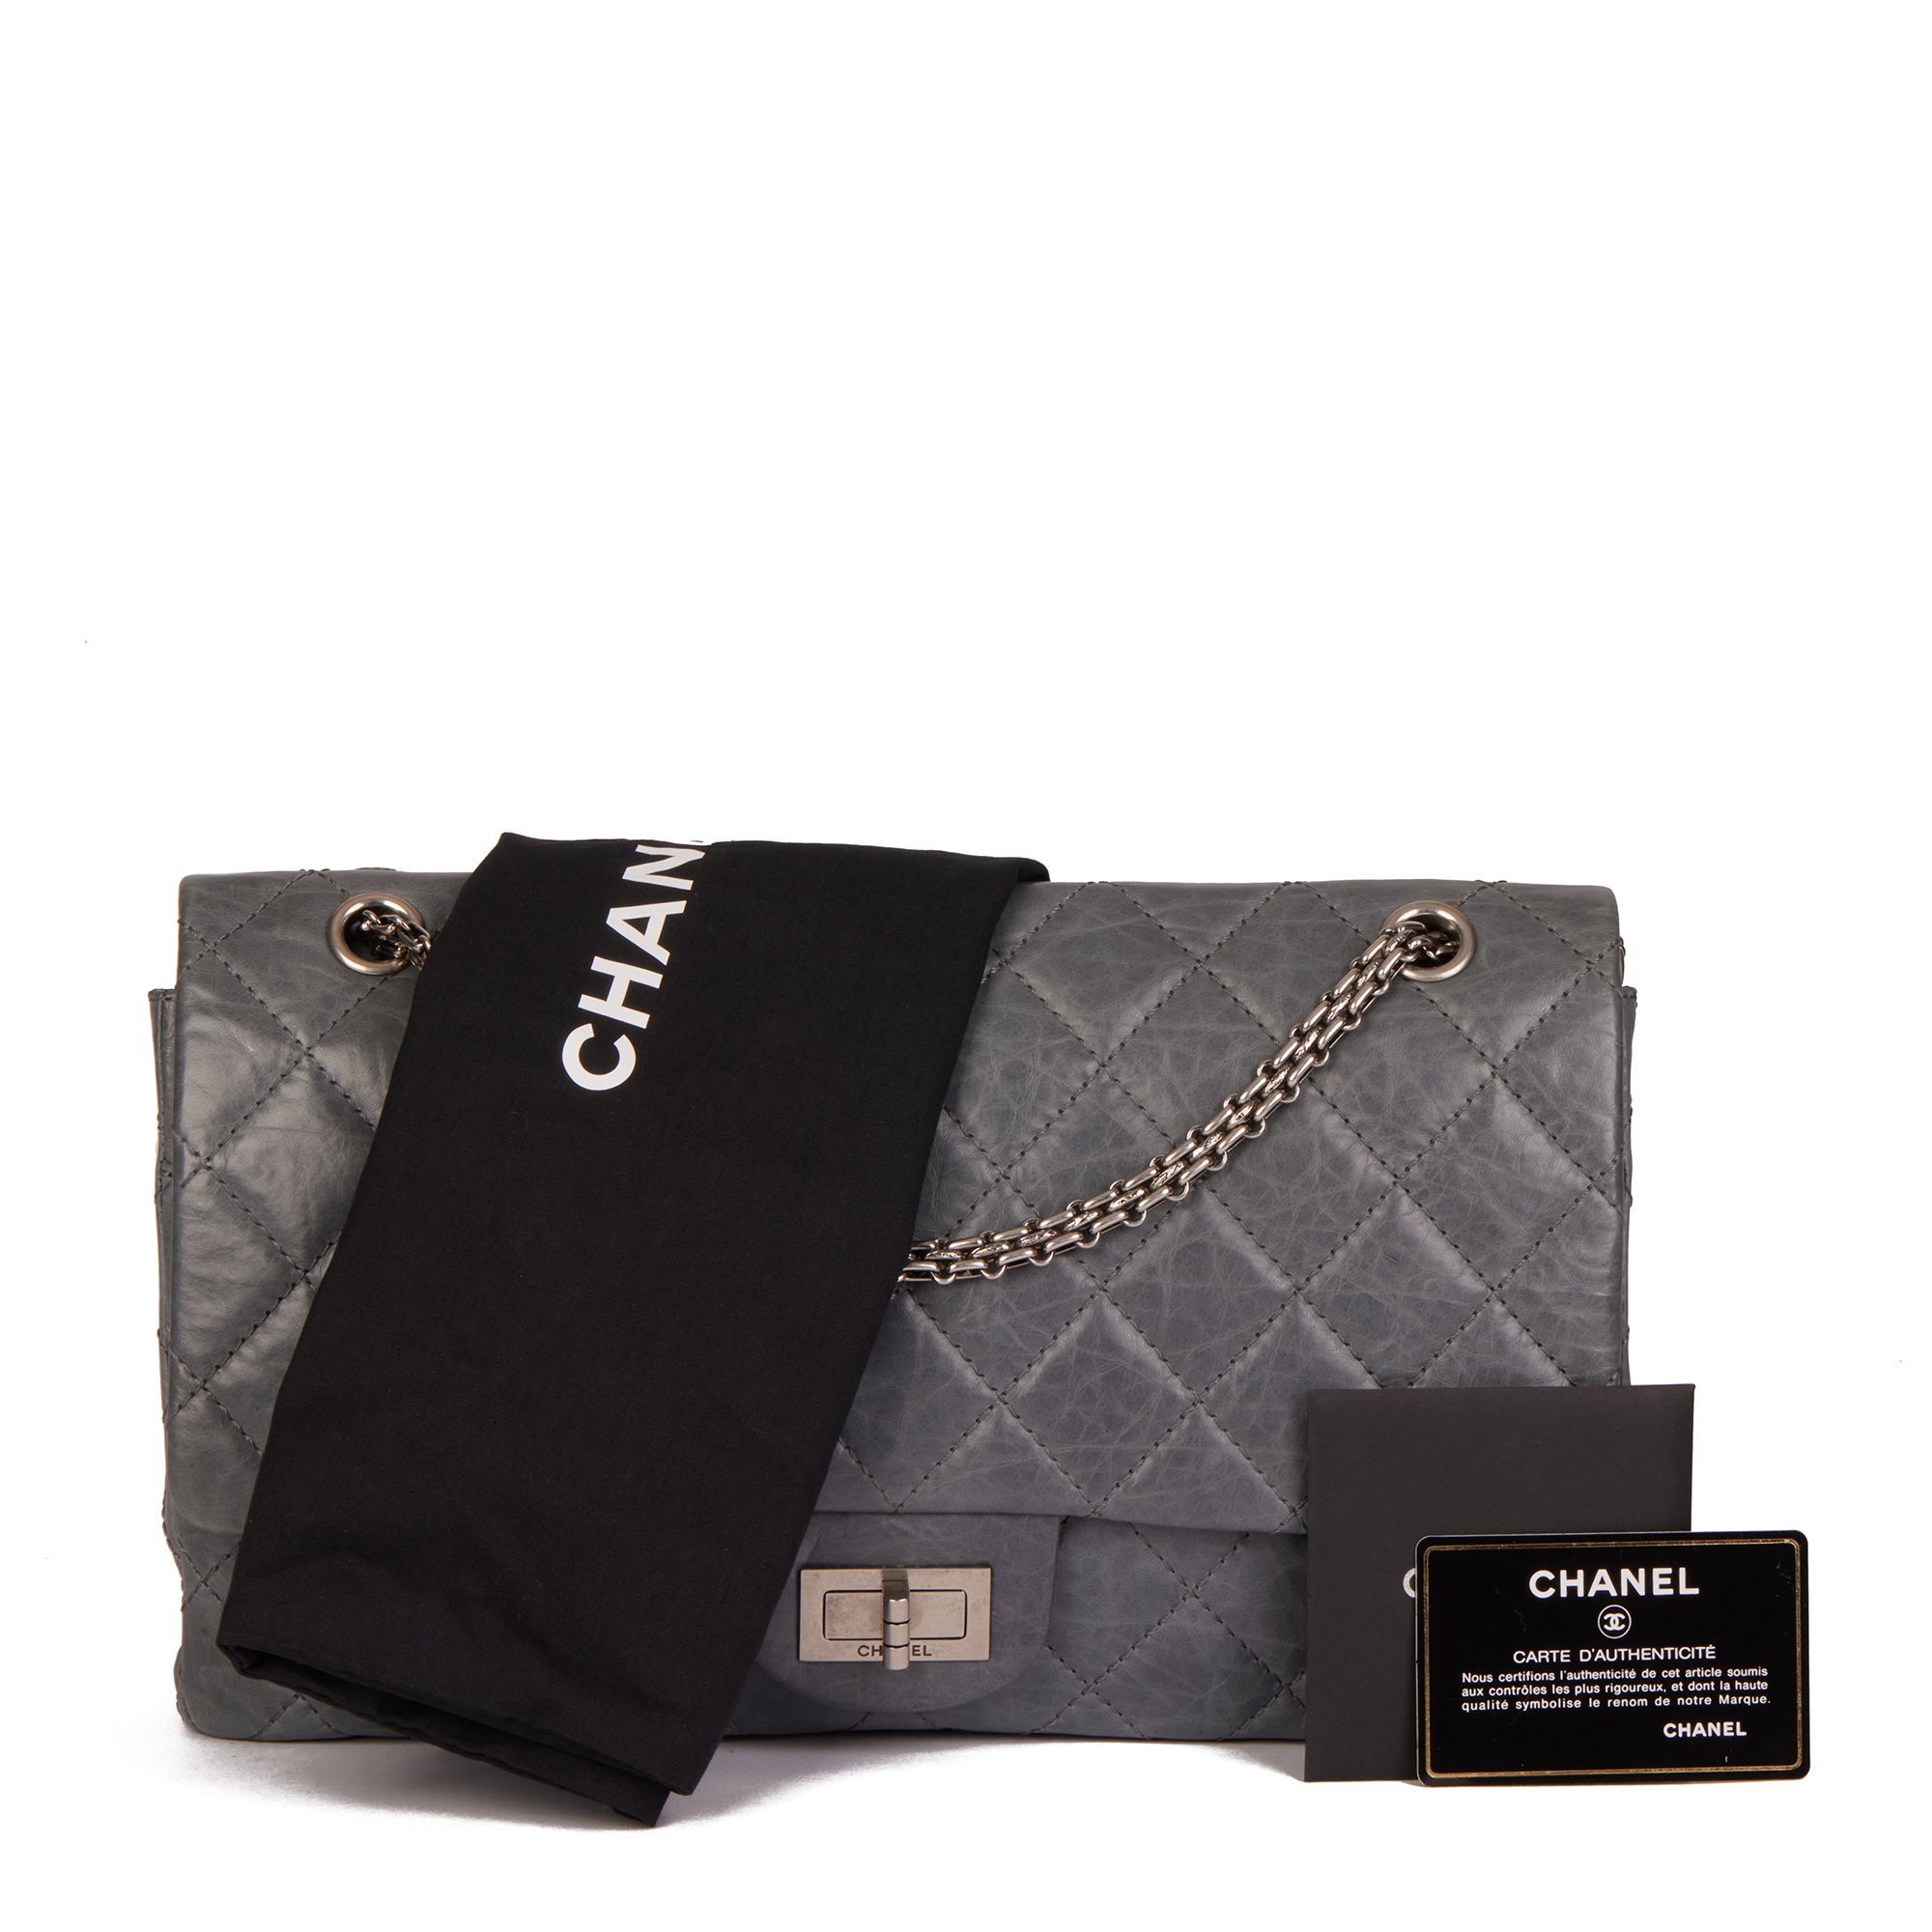 Chanel Grey Quilted Aged Calfskin Leather 2005 50th Anniversary Edition 227 2.55 Reissue Double Flap Bag